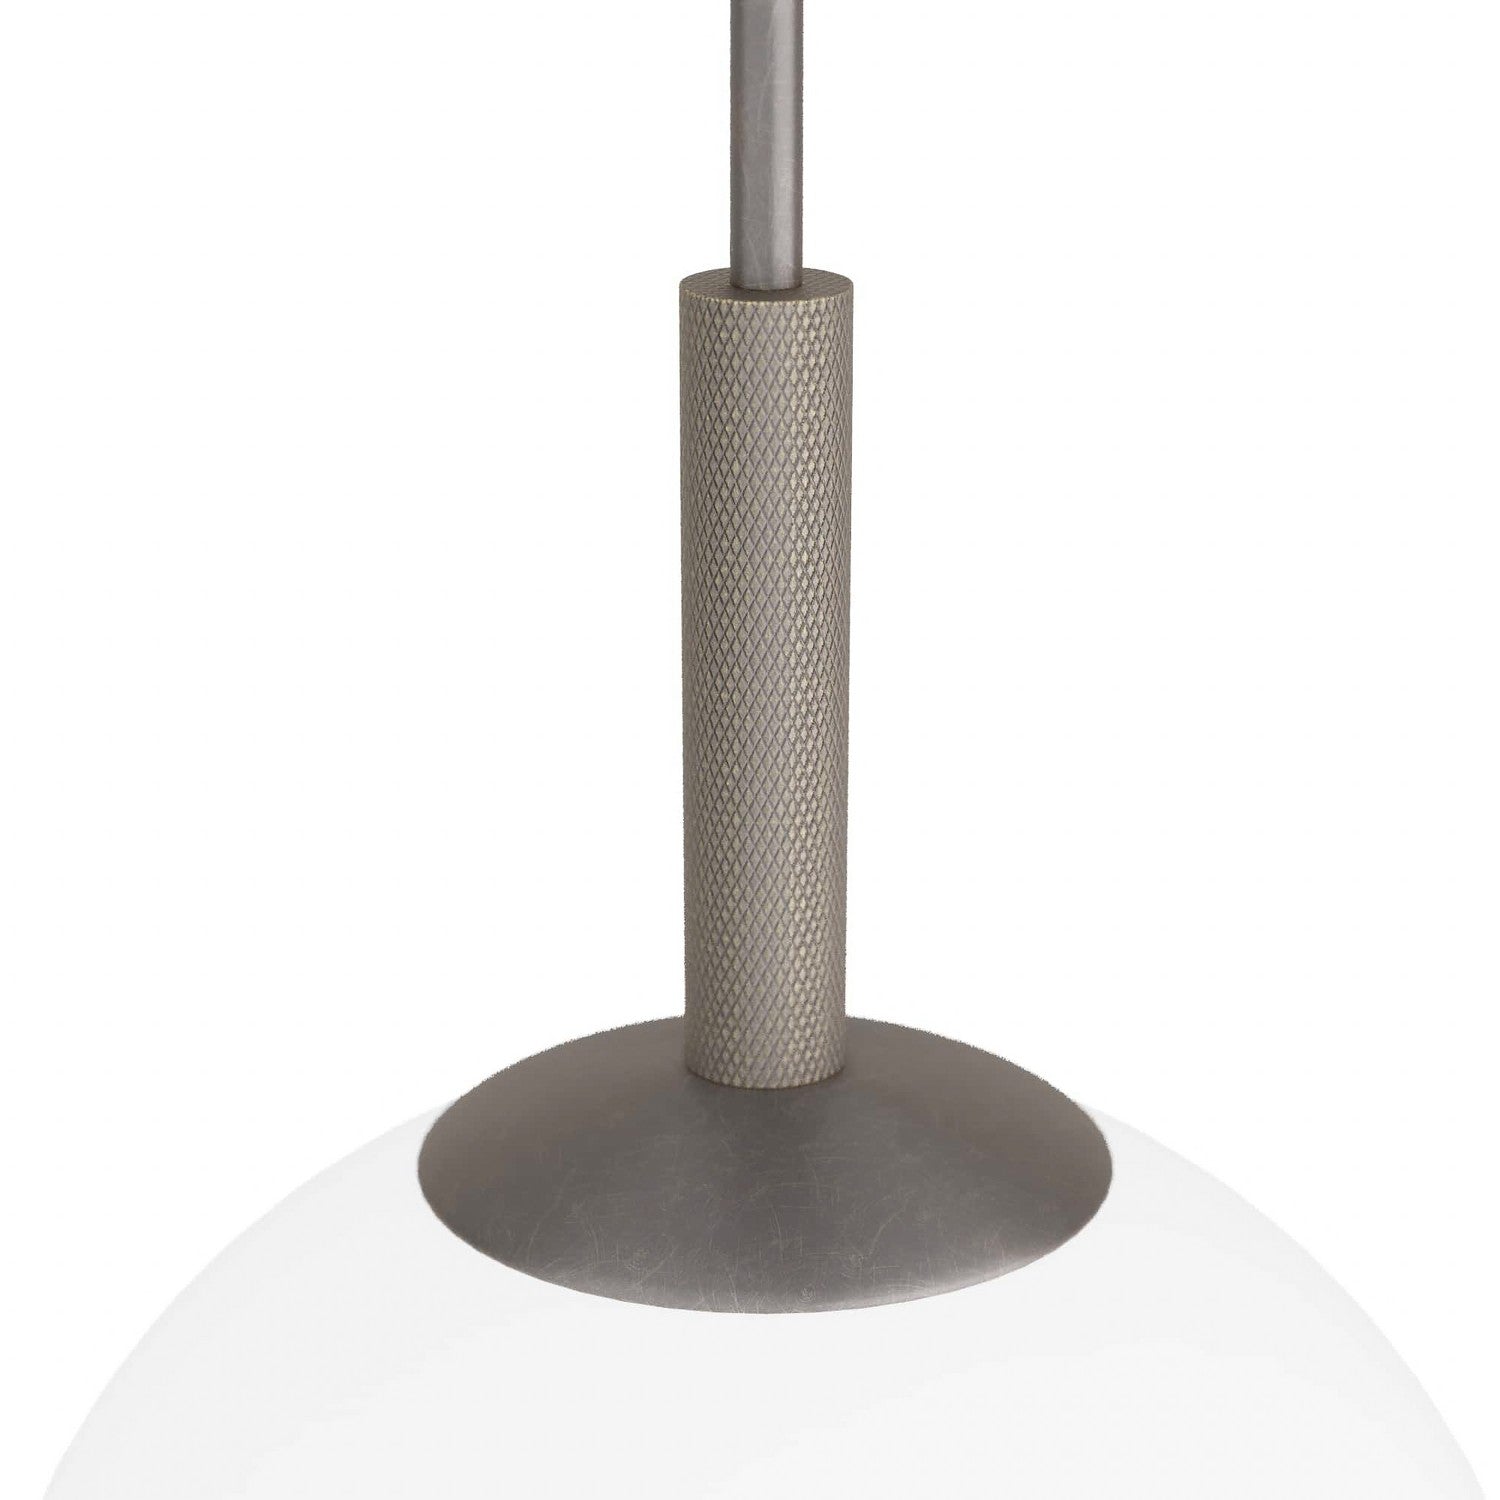 LED Pendant from the Tirso collection in Opal finish